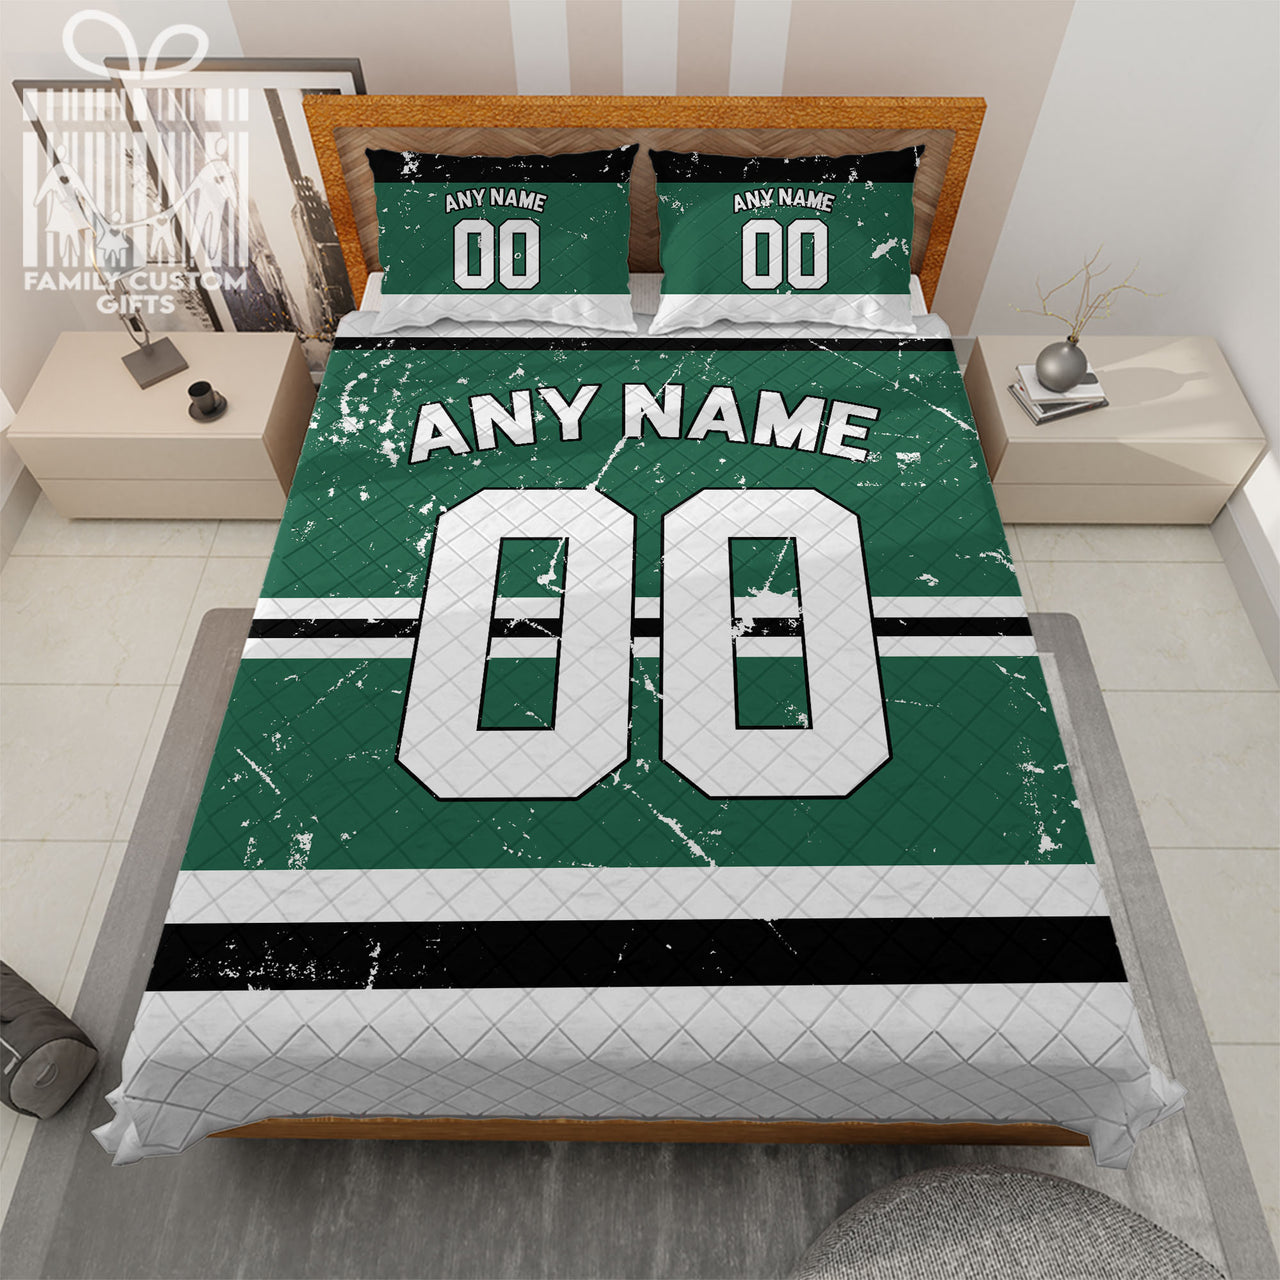 Custom Quilt Sets Dallas Jersey Personalized Ice hockey Premium Quilt Bedding for Men Women